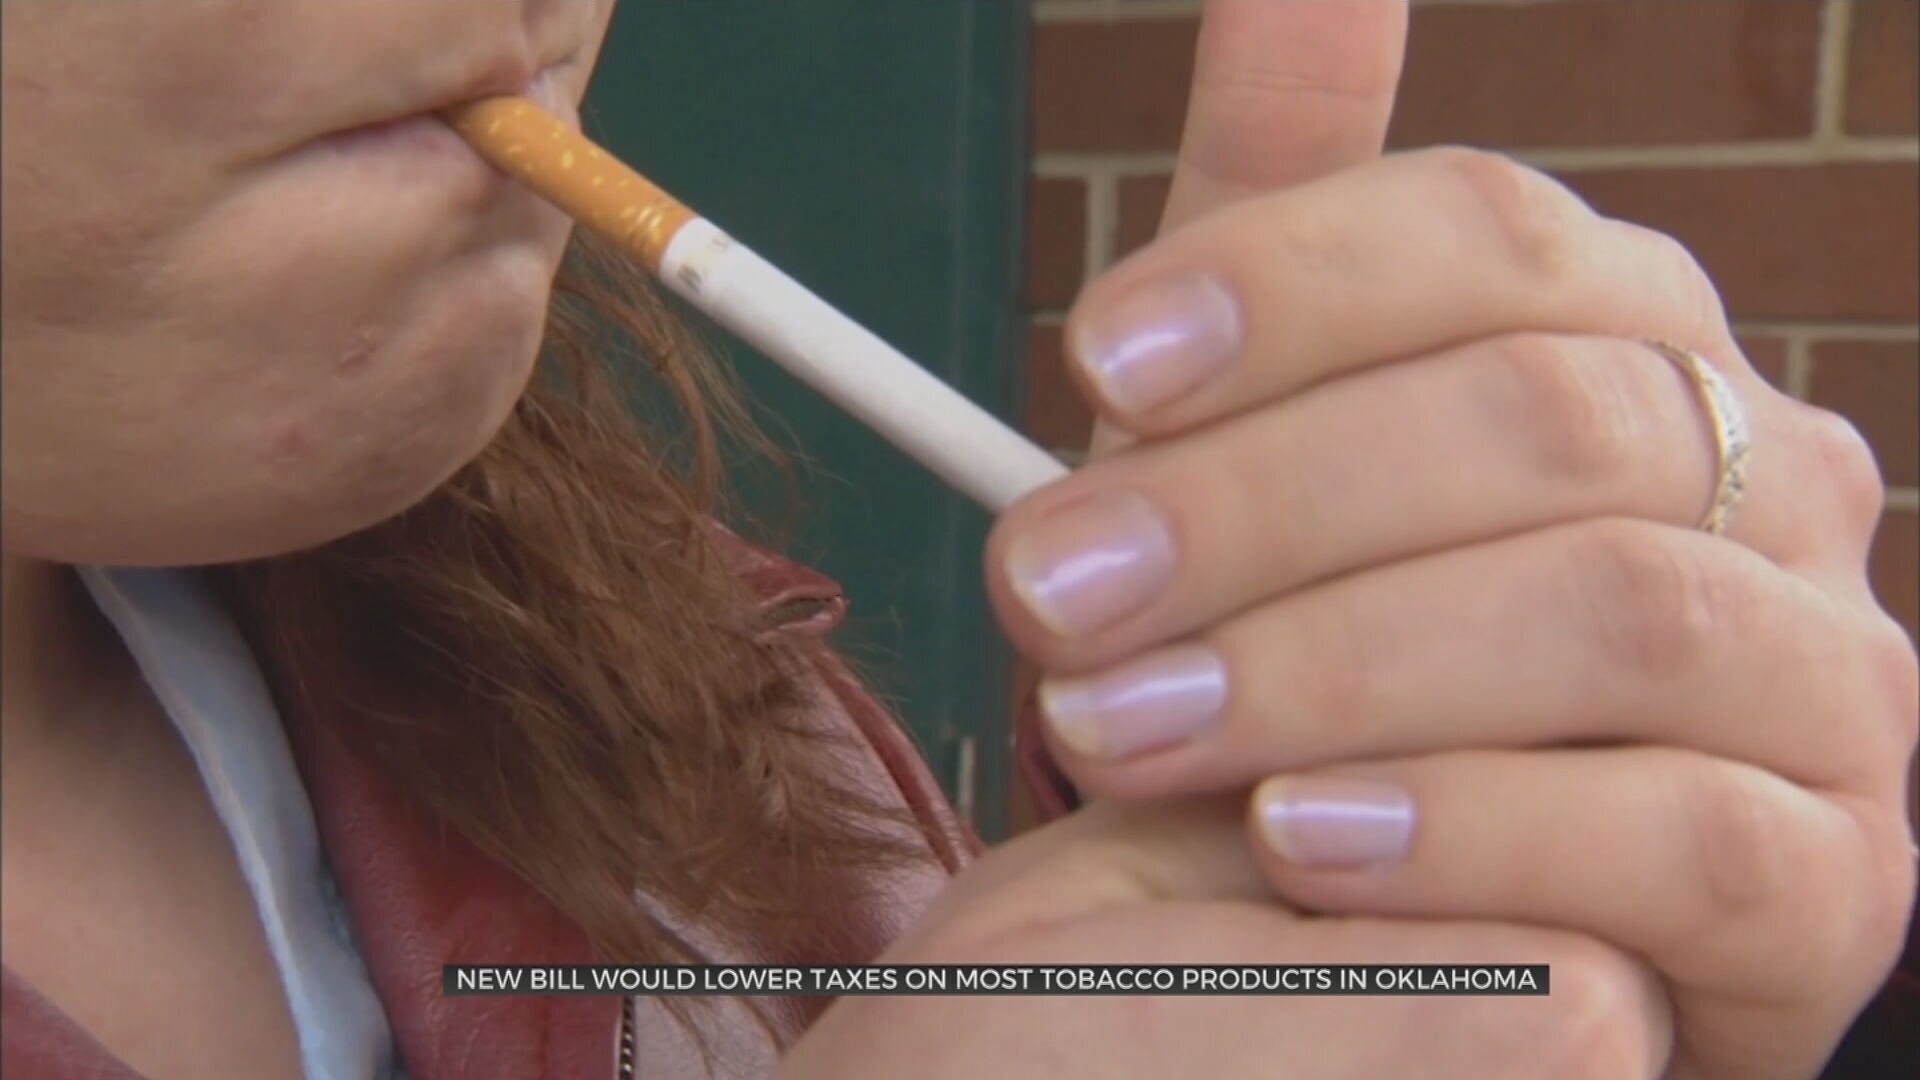 Health Experts Concerned After New Oklahoma Bill Lowers Taxes On Certain Tobacco Products 